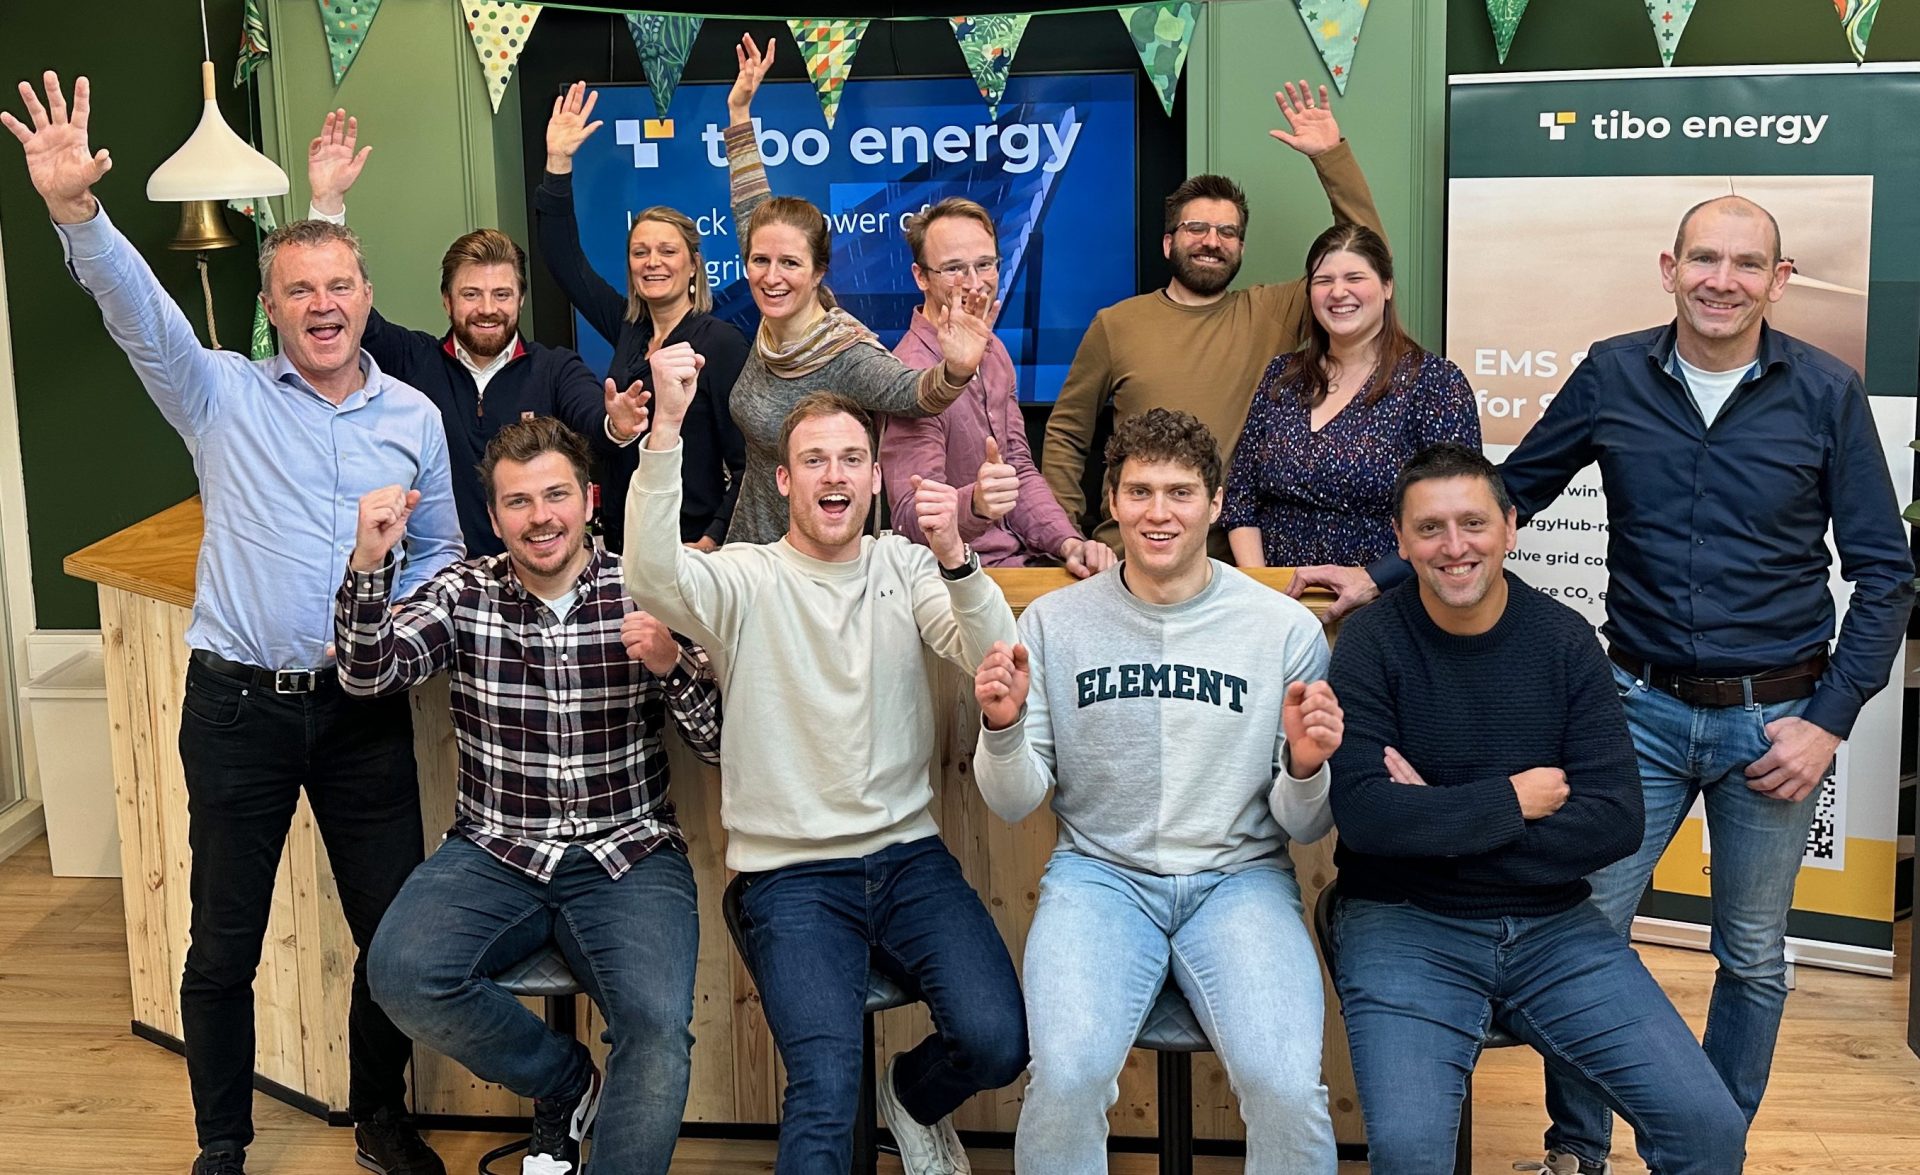 tibo energy raises €3M seed round to optimise commercial and industrial energy use worldwide 